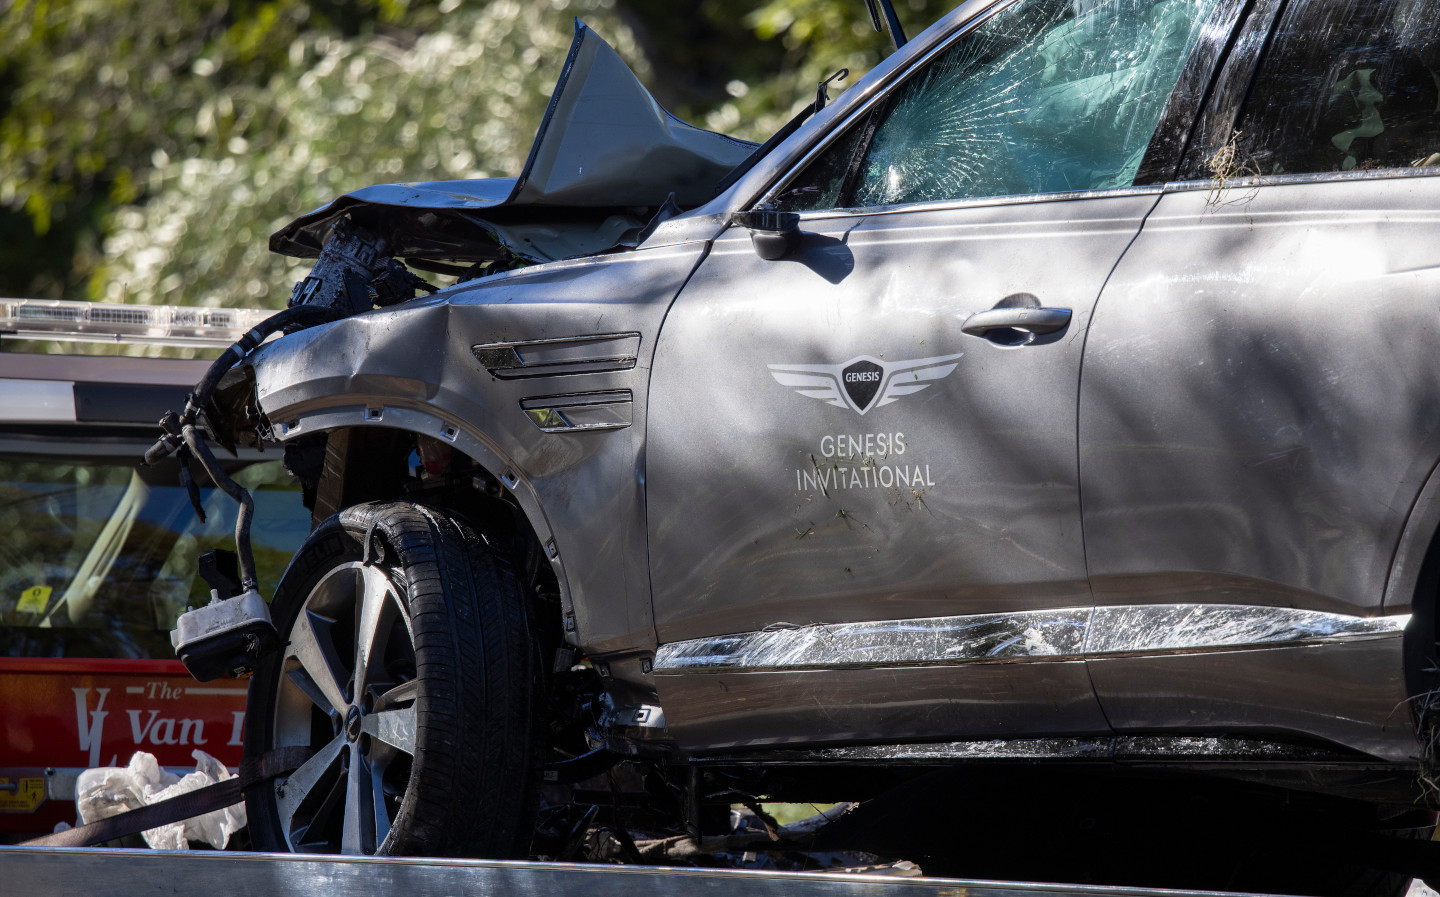 Tiger Woods "awake, responsive and recovering" after crashing Genesis SUV